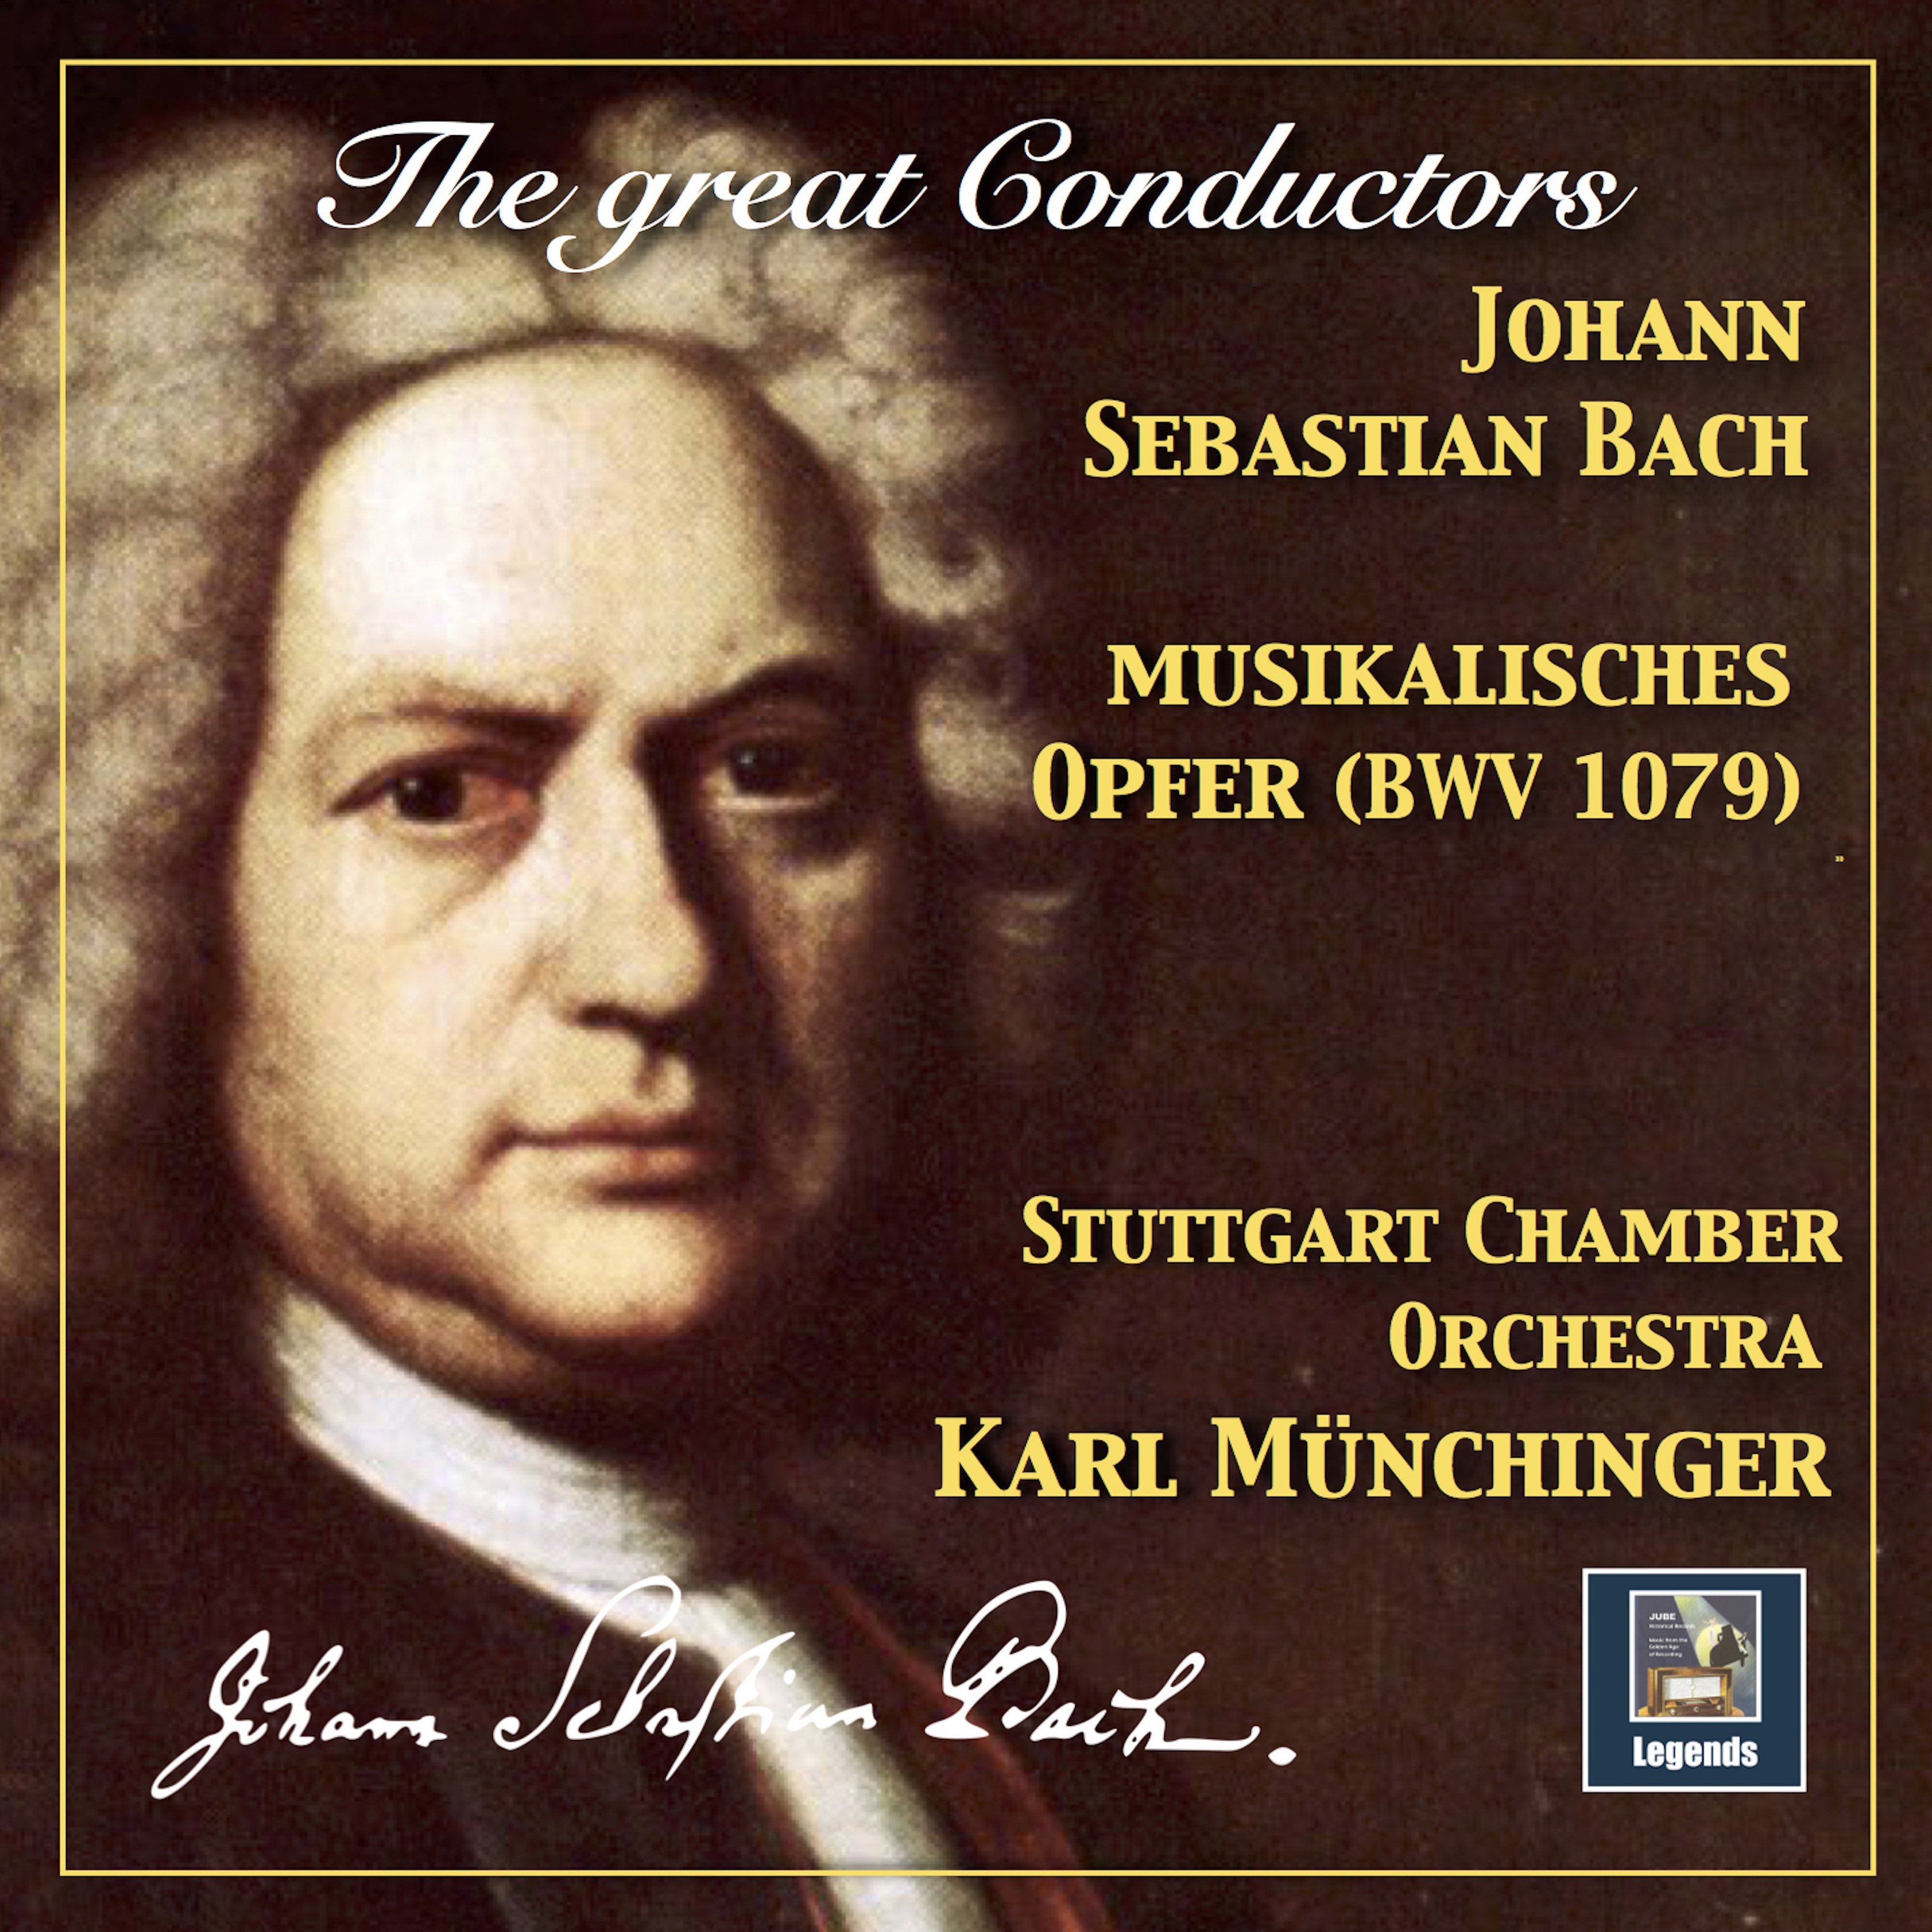 Musikalisches Opfer, BWV 1079 Arr. K. Mü nchinger for Chamber Orchestra: Canon a 2 circularis per tono